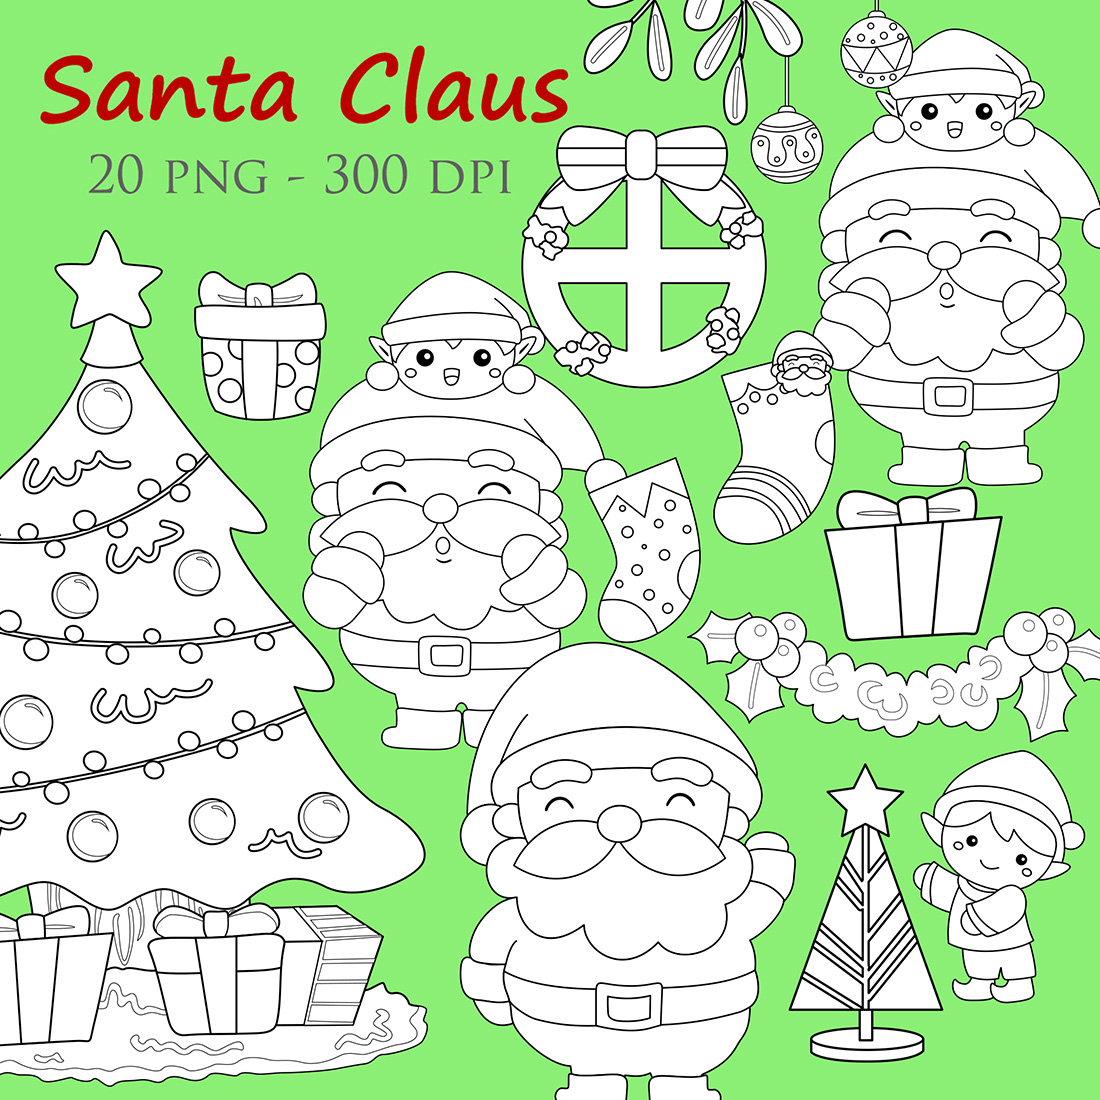 Santa Claus Kids Elf Christmas Tree Decoration Object Cartoon Digital Stamp Outline Black and White cover image.